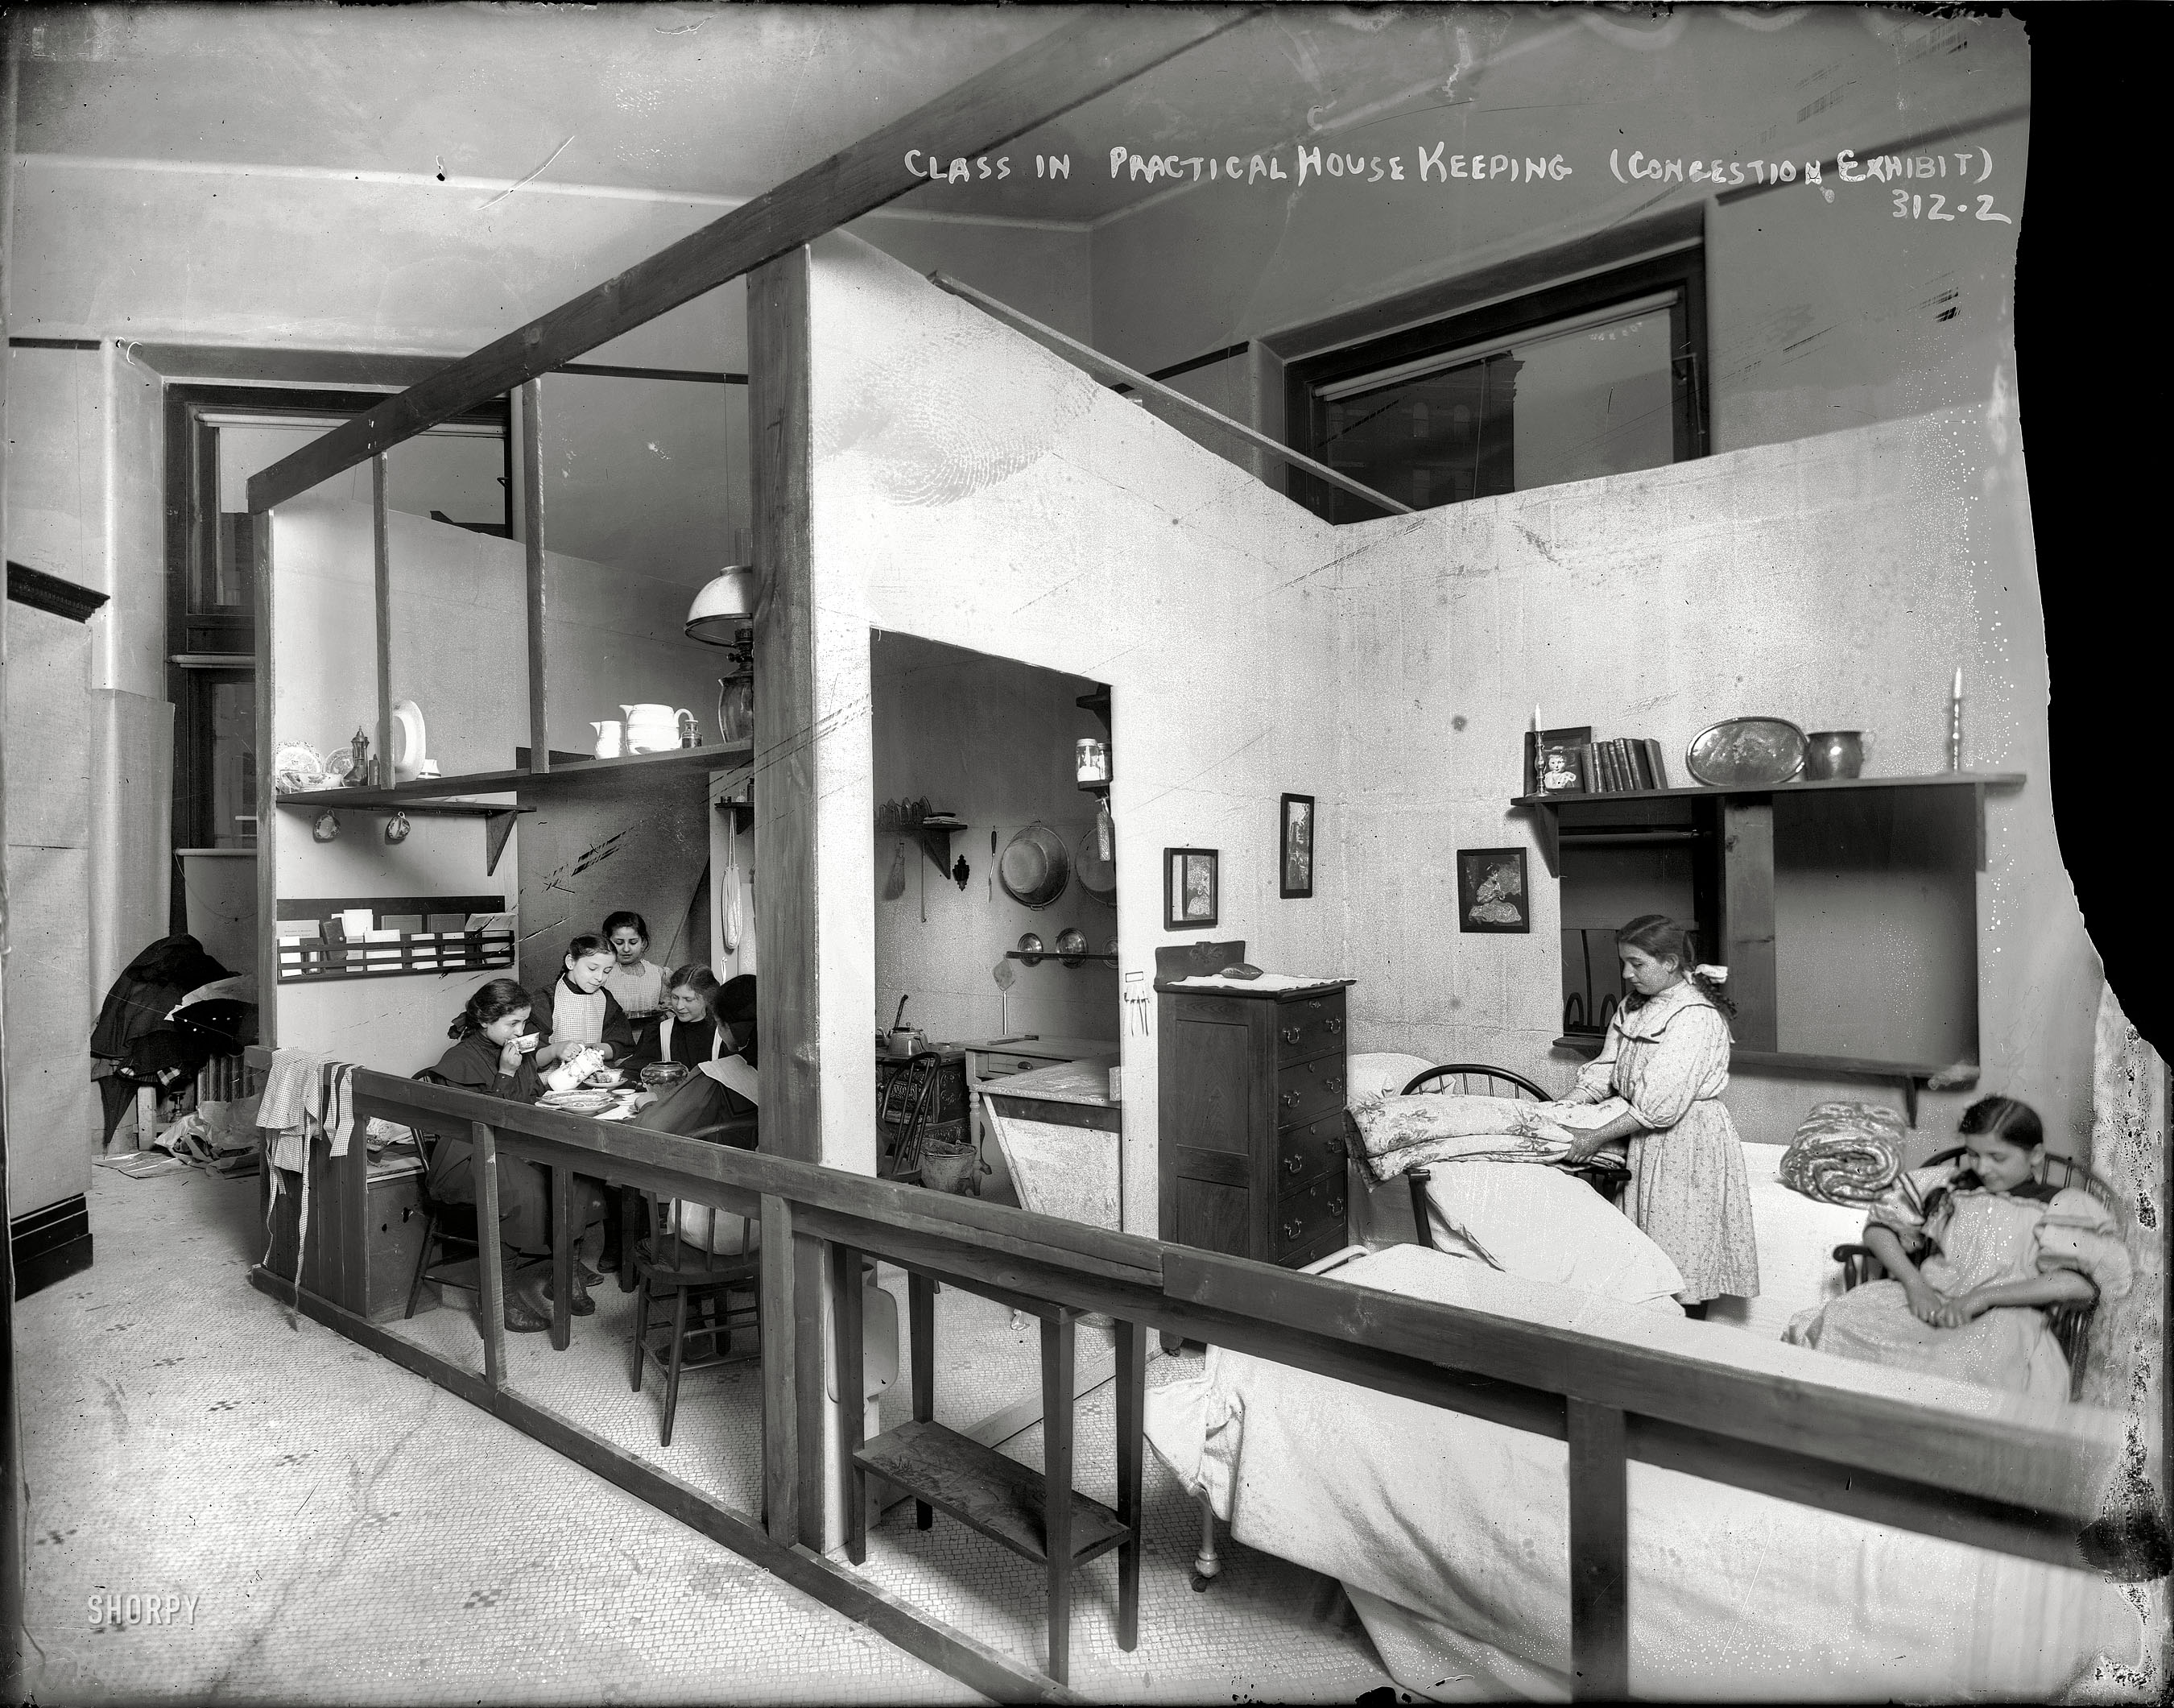 New York circa 1908. "Class in Practical Housekeeping -- Congestion Exhibit." 8x10 glass negative, George Grantham Bain Collection. View full size.